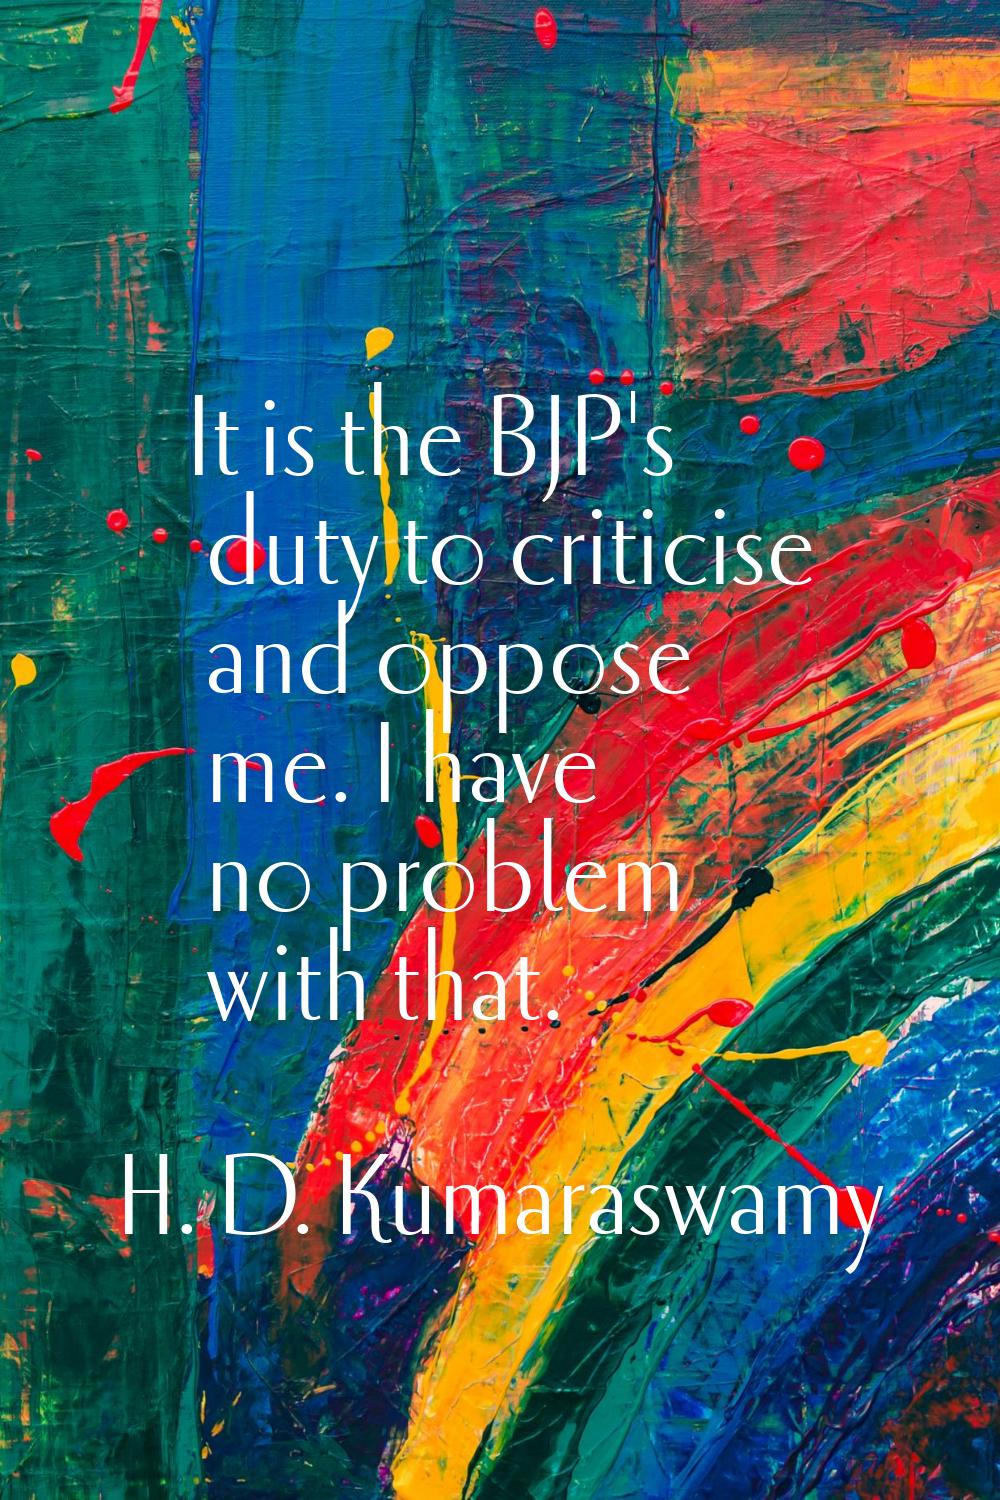 It is the BJP's duty to criticise and oppose me. I have no problem with that.